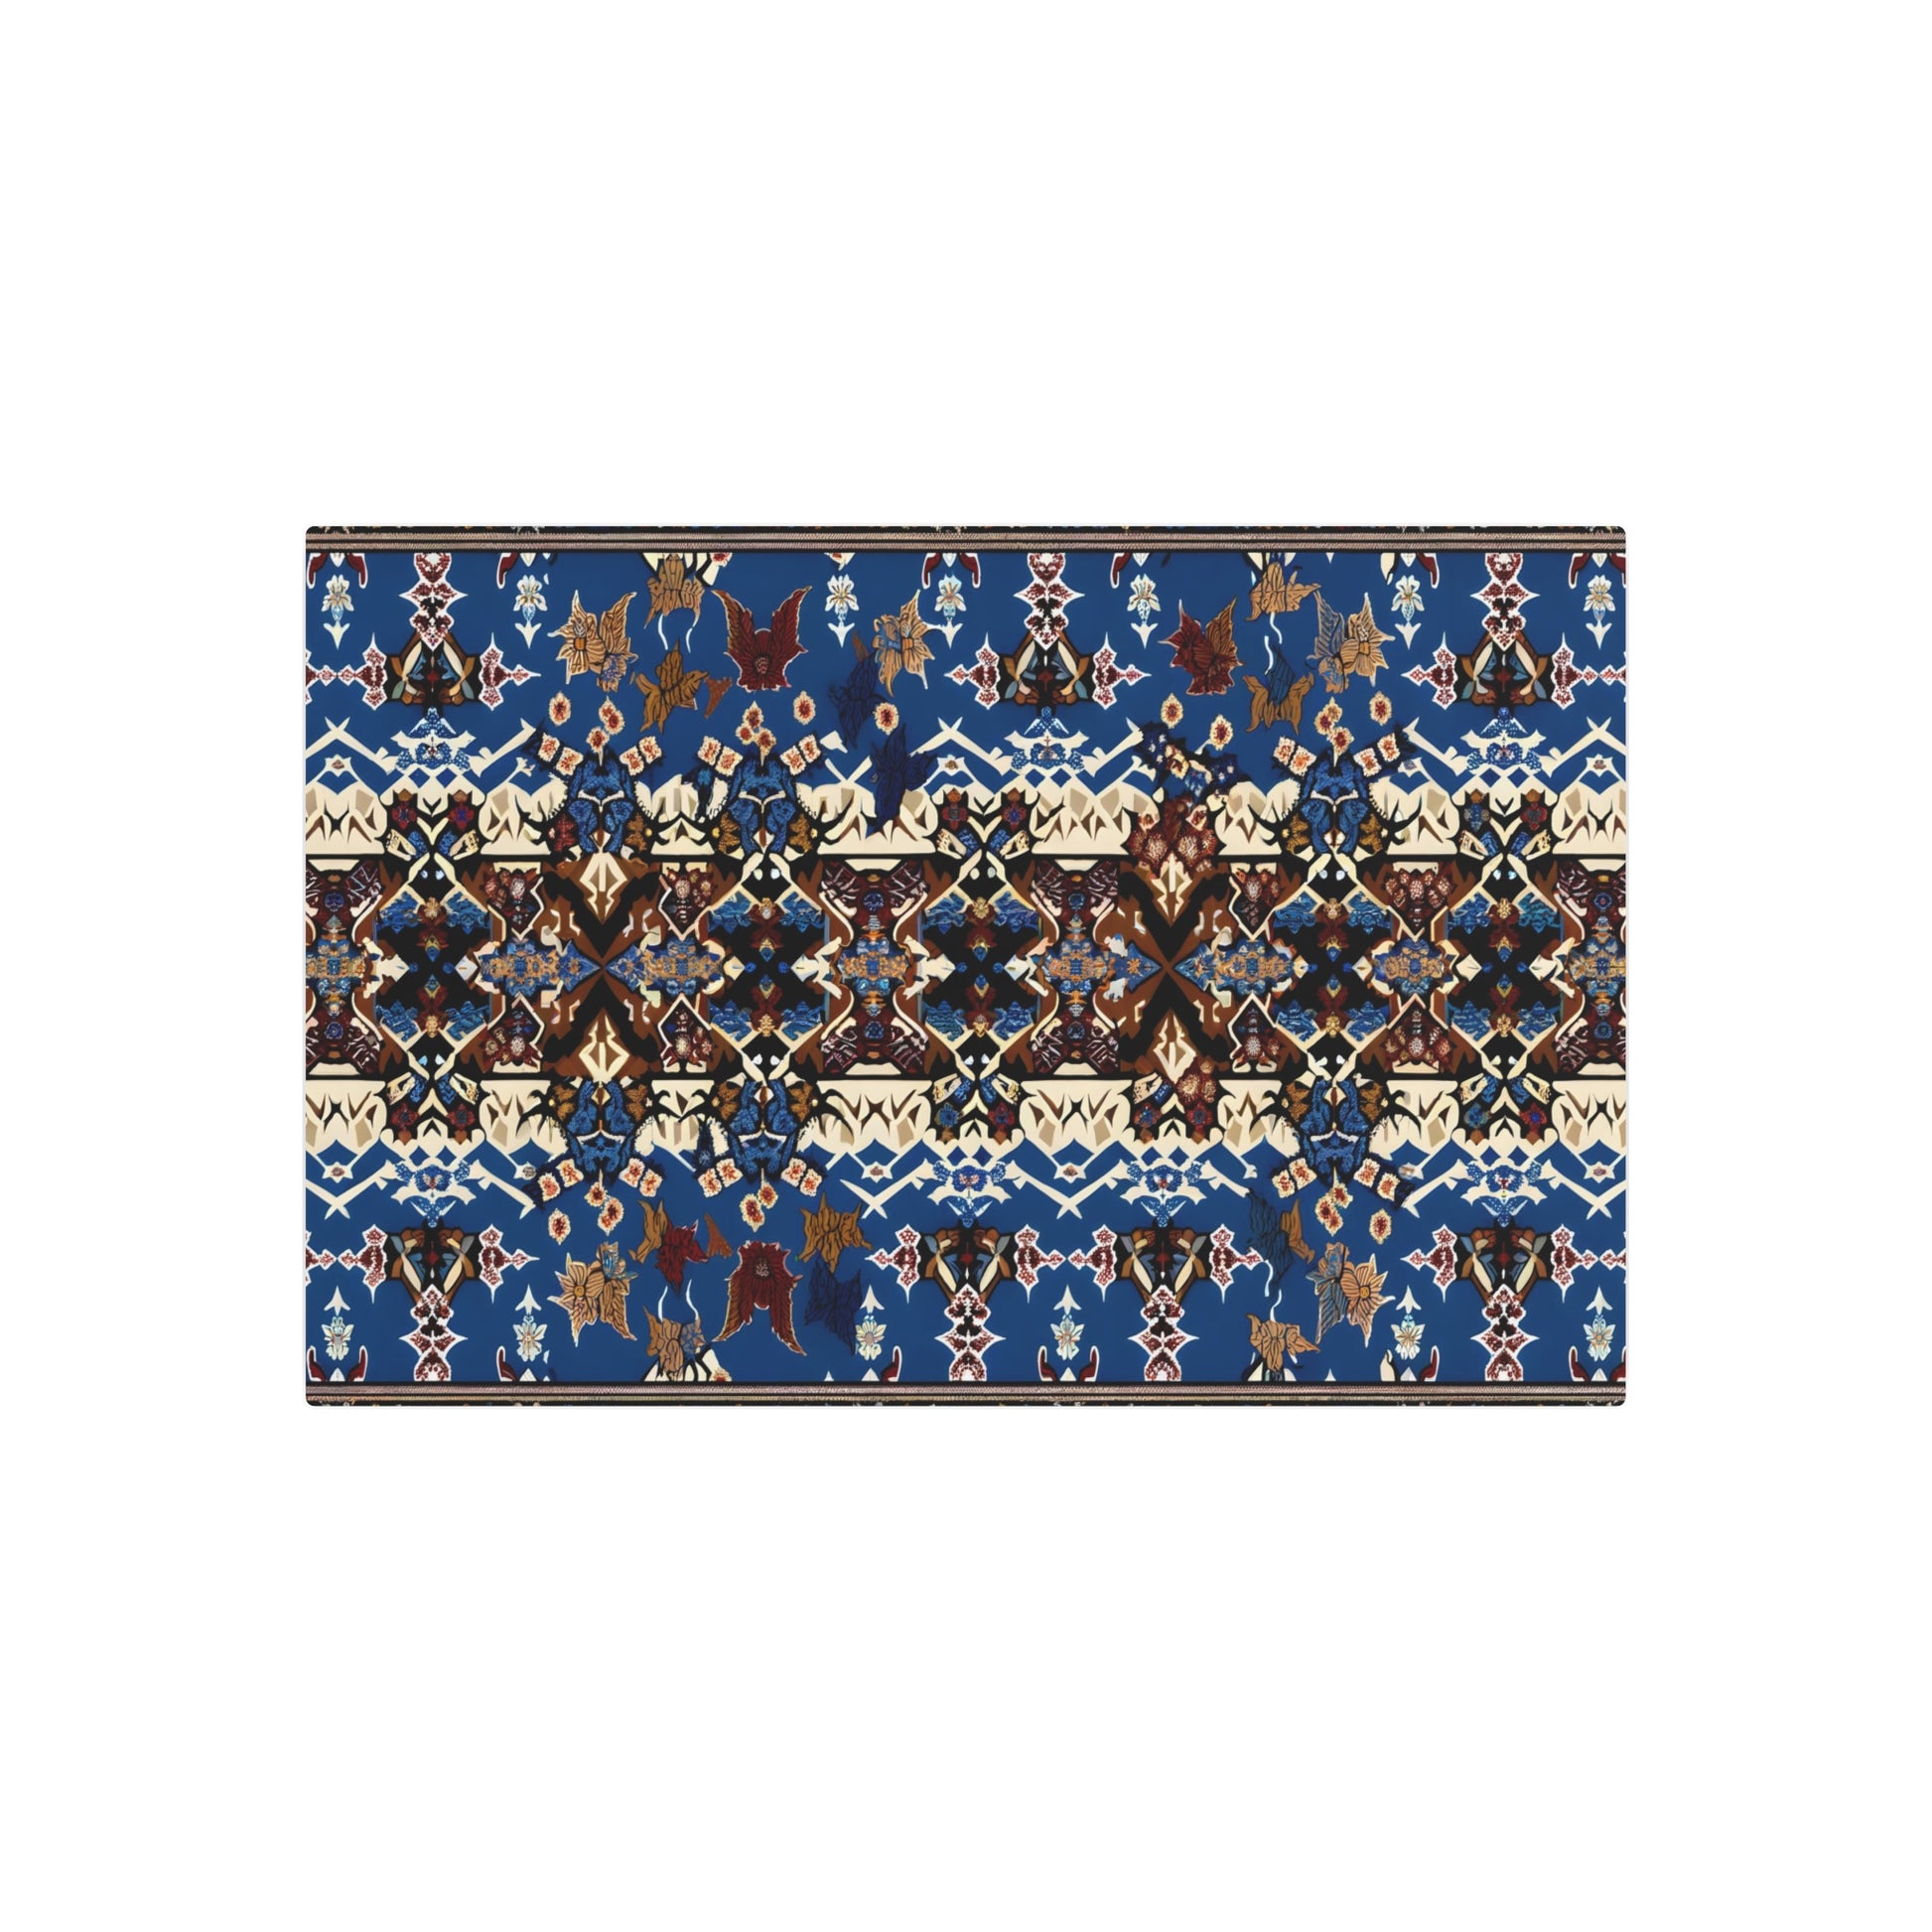 Metal Poster Art | "Traditional Indonesian Batik Art - Geometric & Floral Patterns in Deep Blue and Earthy Brown with Red & Yellow Accents - Non-Western Global - Metal Poster Art 36″ x 24″ (Horizontal) 0.12''